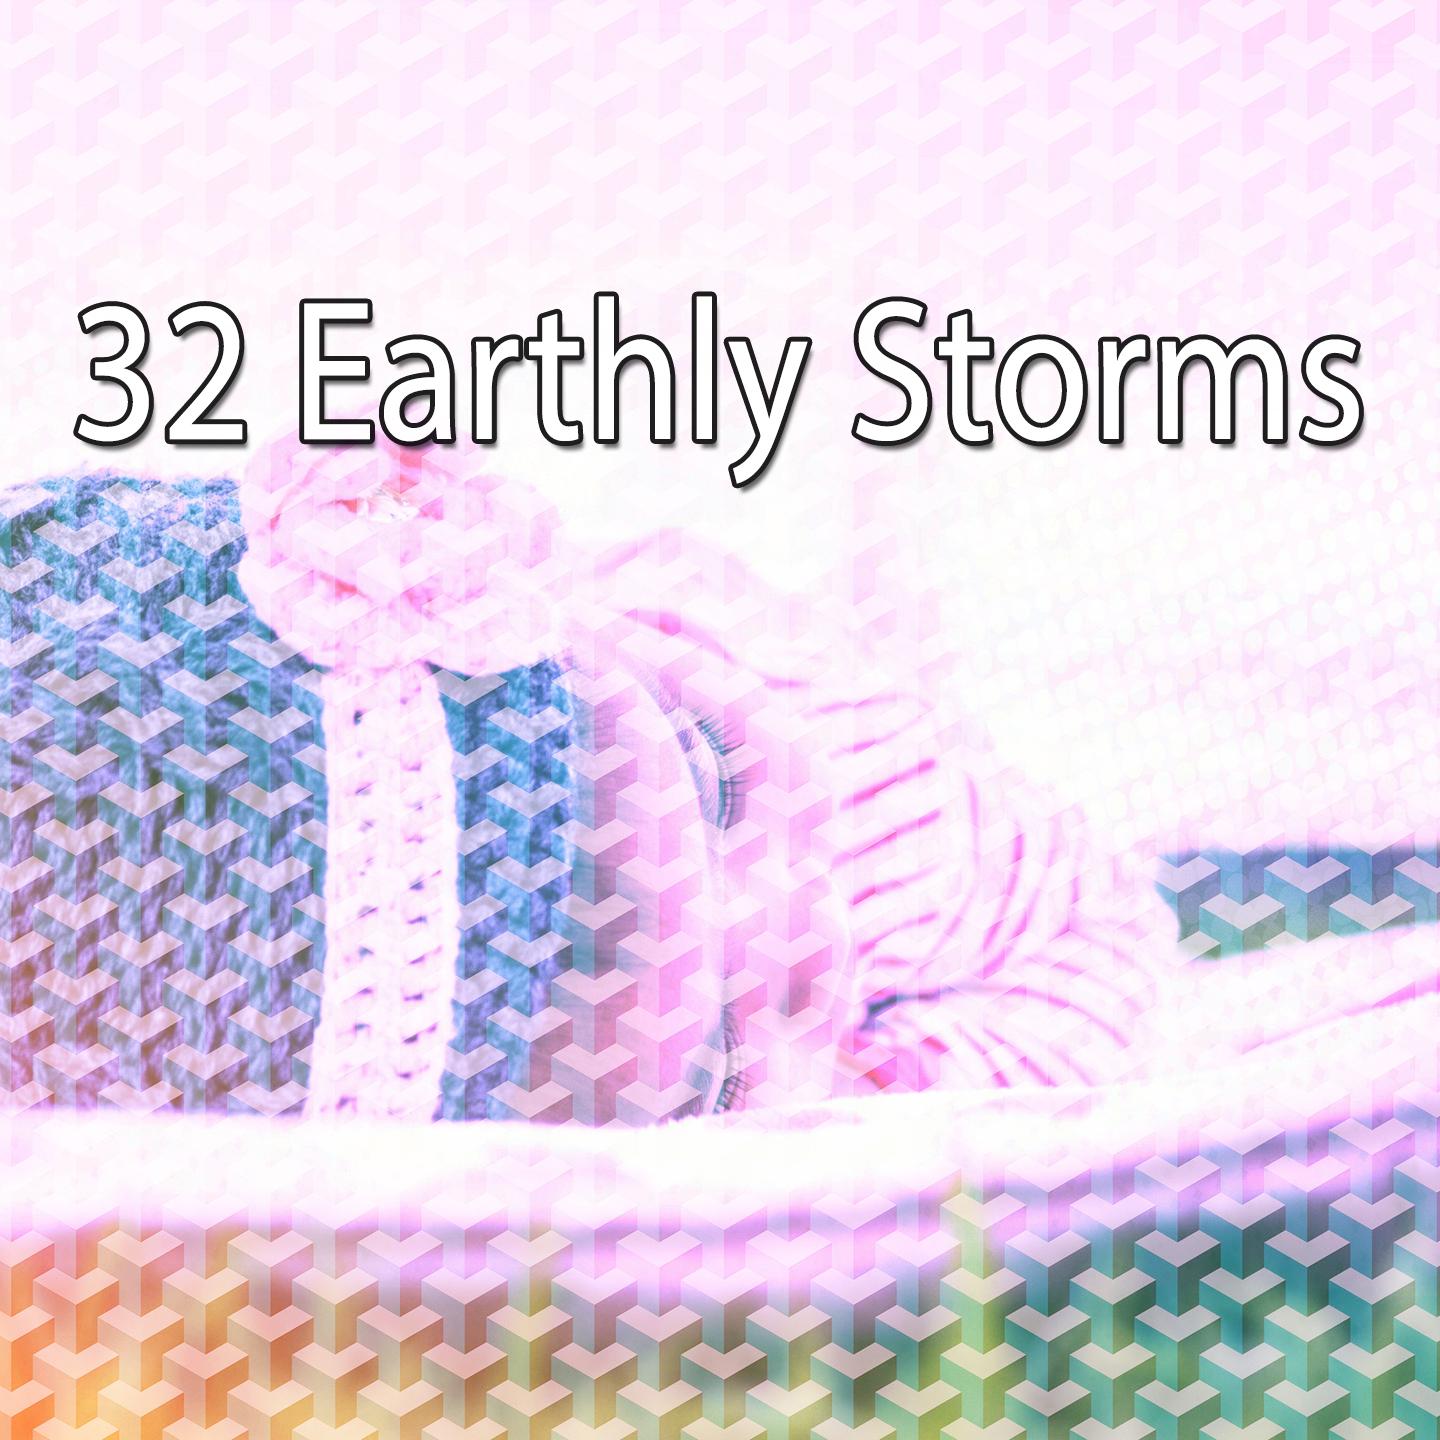 32 Earthly Storms